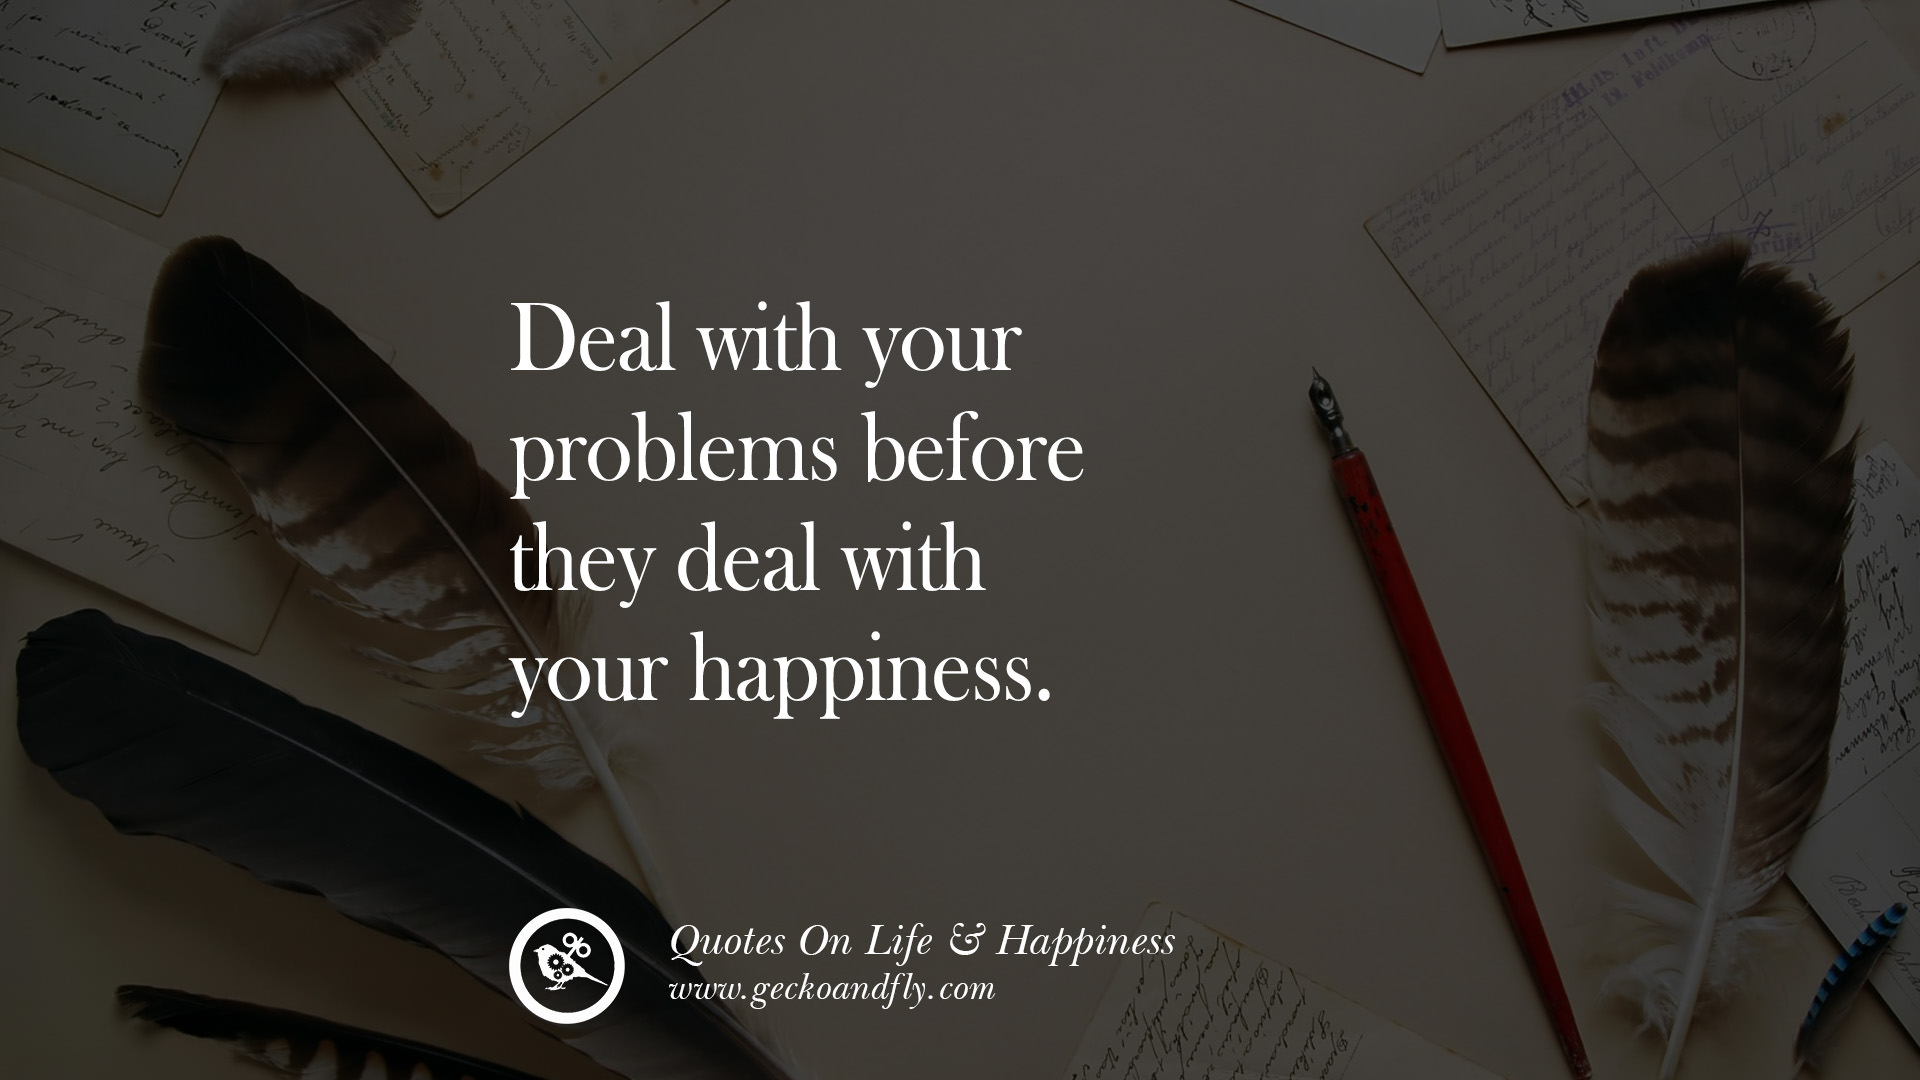 your happiness. happy life quote instagram quotes about being happy 